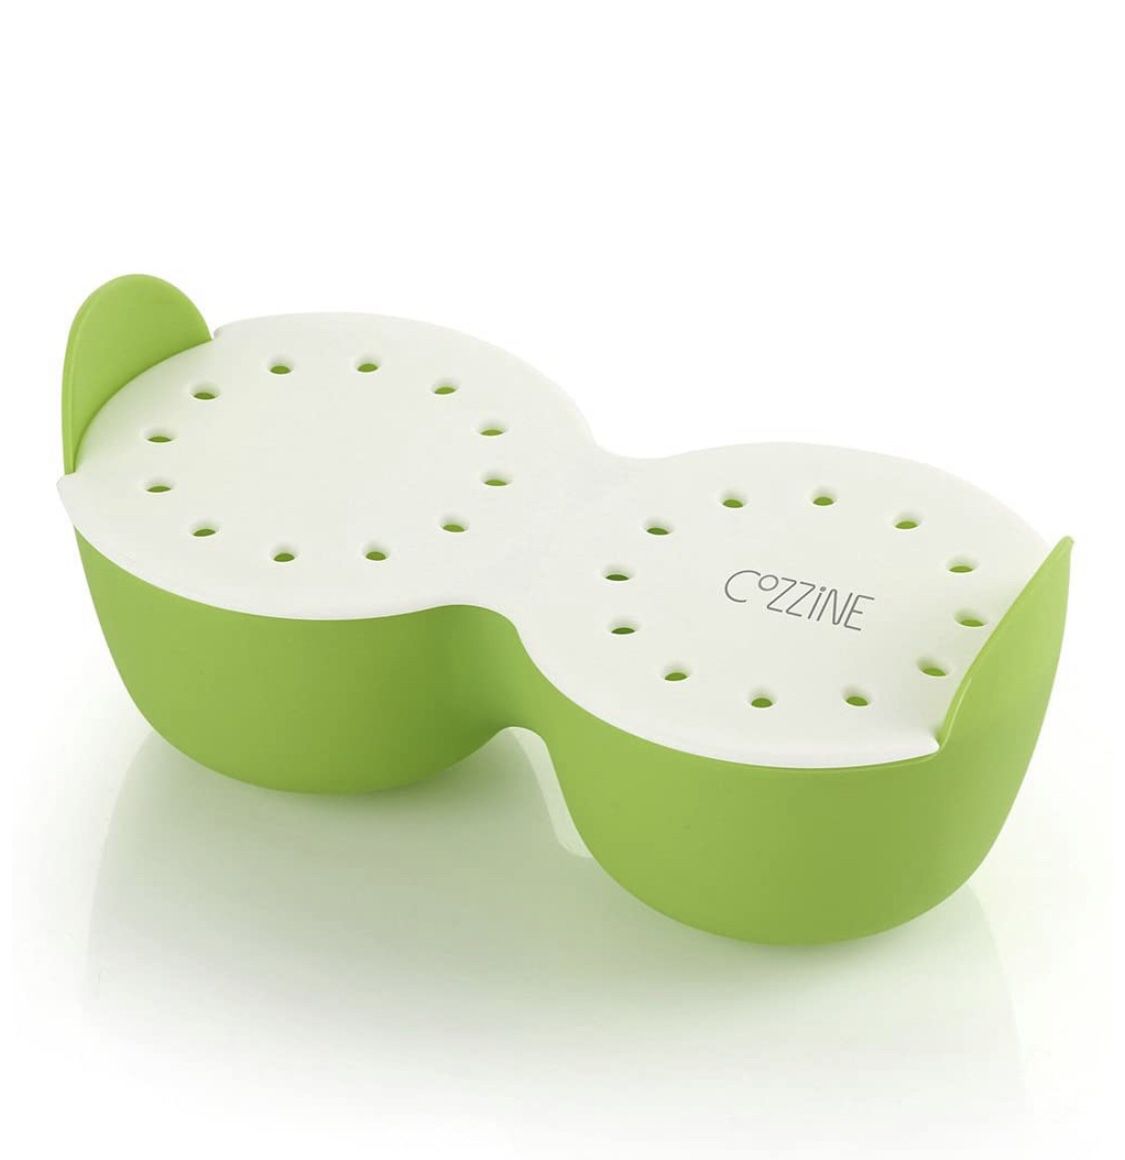 Egg Poacher, Cozzine Egg Cooker Silicone Egg Poaching Cups with Ring Standers,